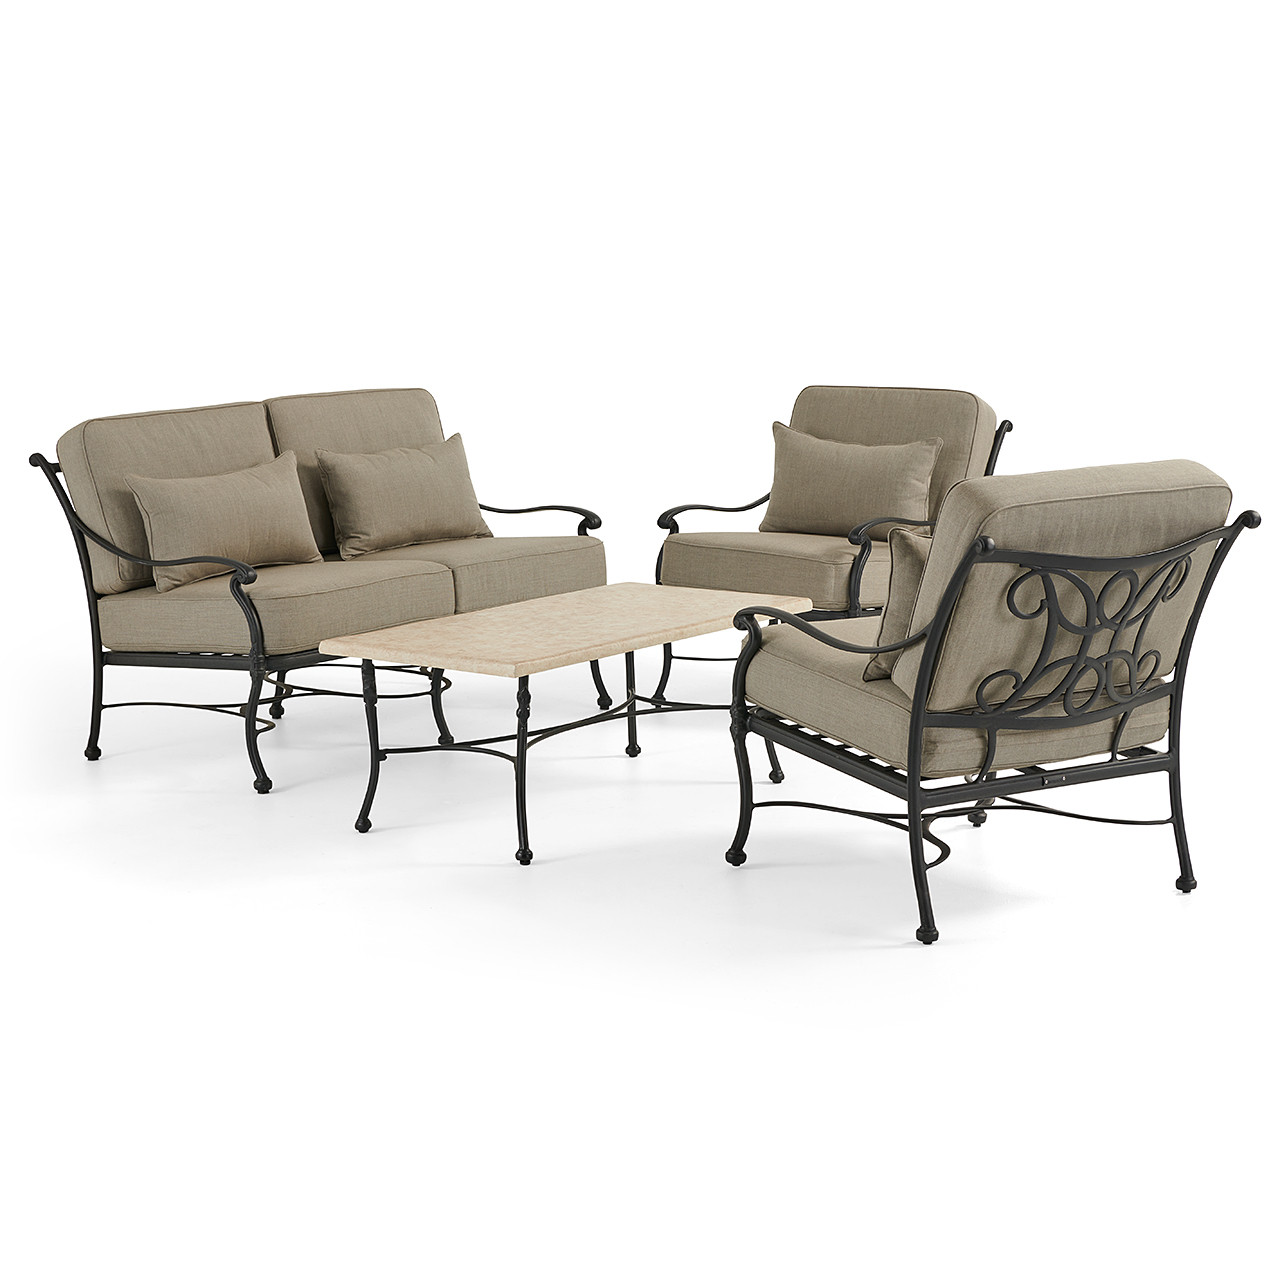 Chateau Rust Cast Aluminum and Cushion 4 Pc. Loveseat Group with 44 x 24 in. Marble Top Coffee Table